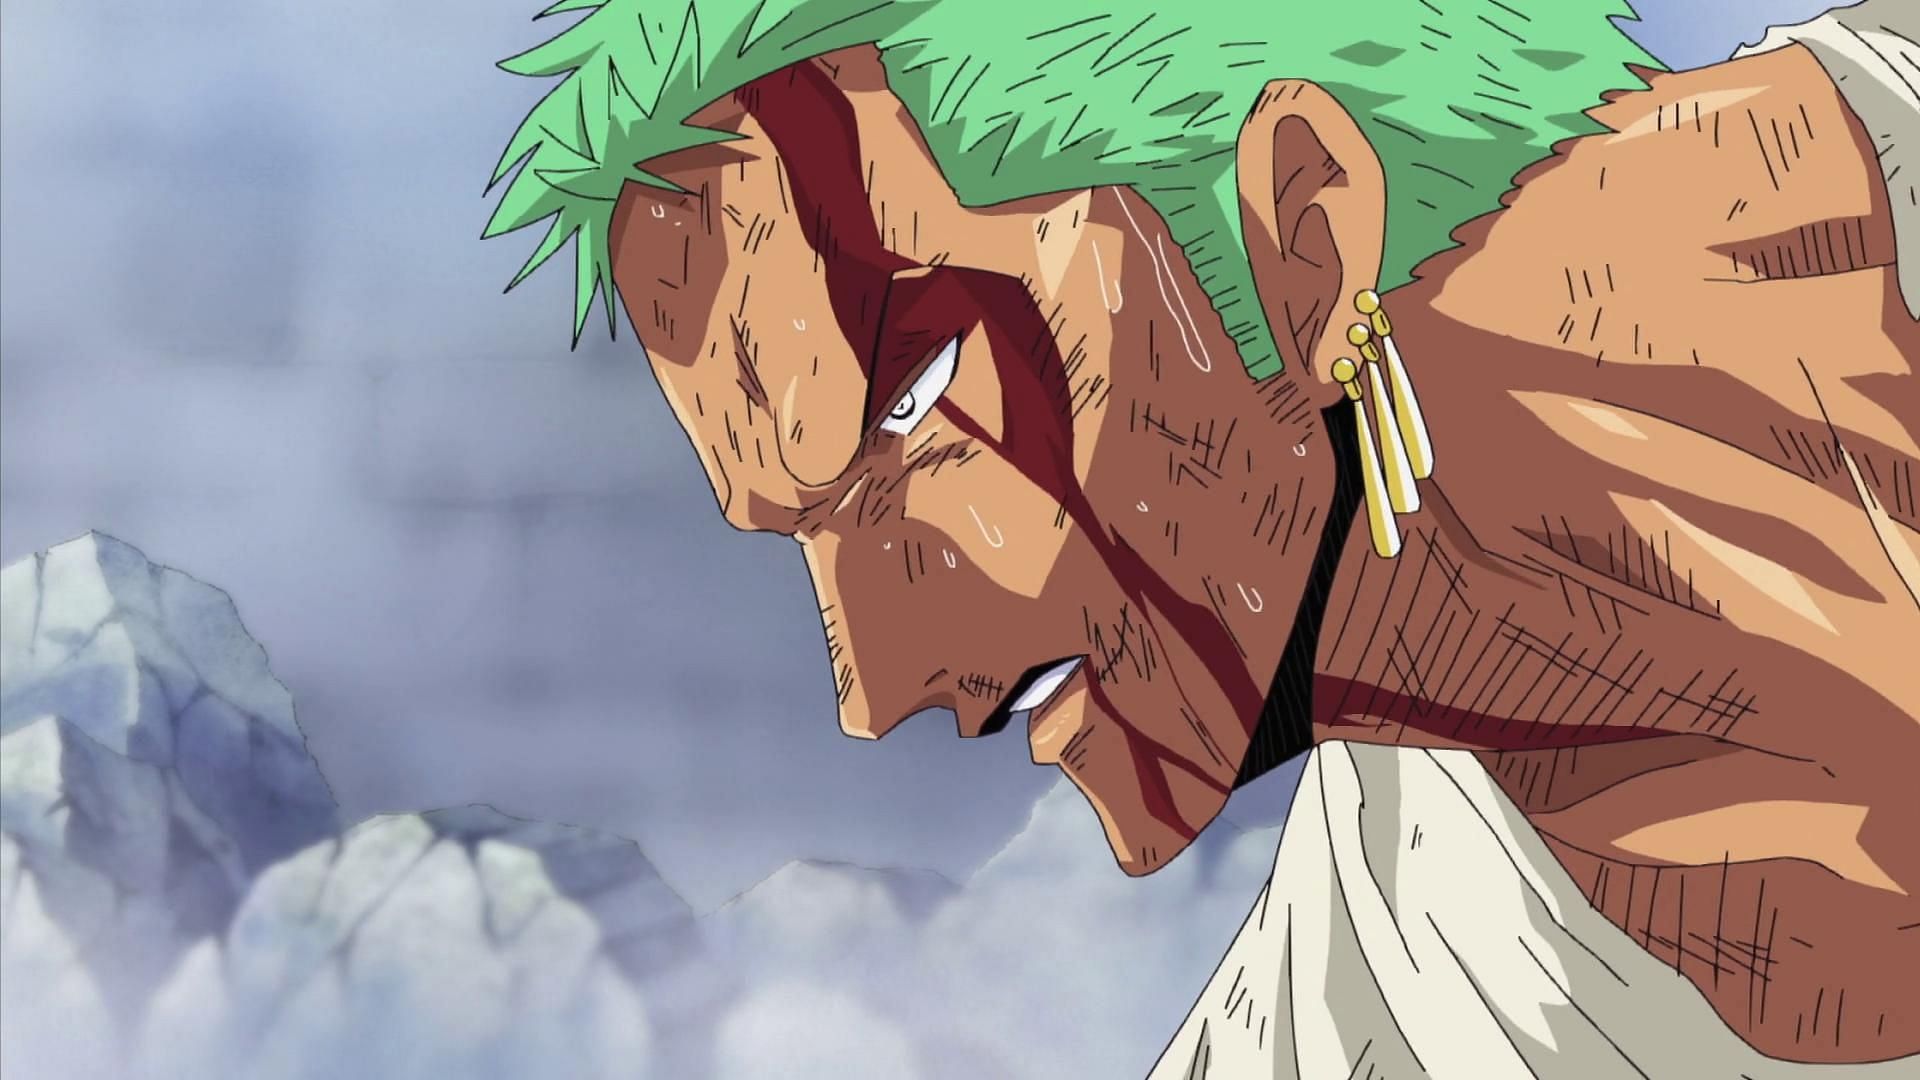 No one is a better right-hand man than Zoro, who selflessly put his life on the line to protect Luffy (Image via Toei Animation, One Piece)